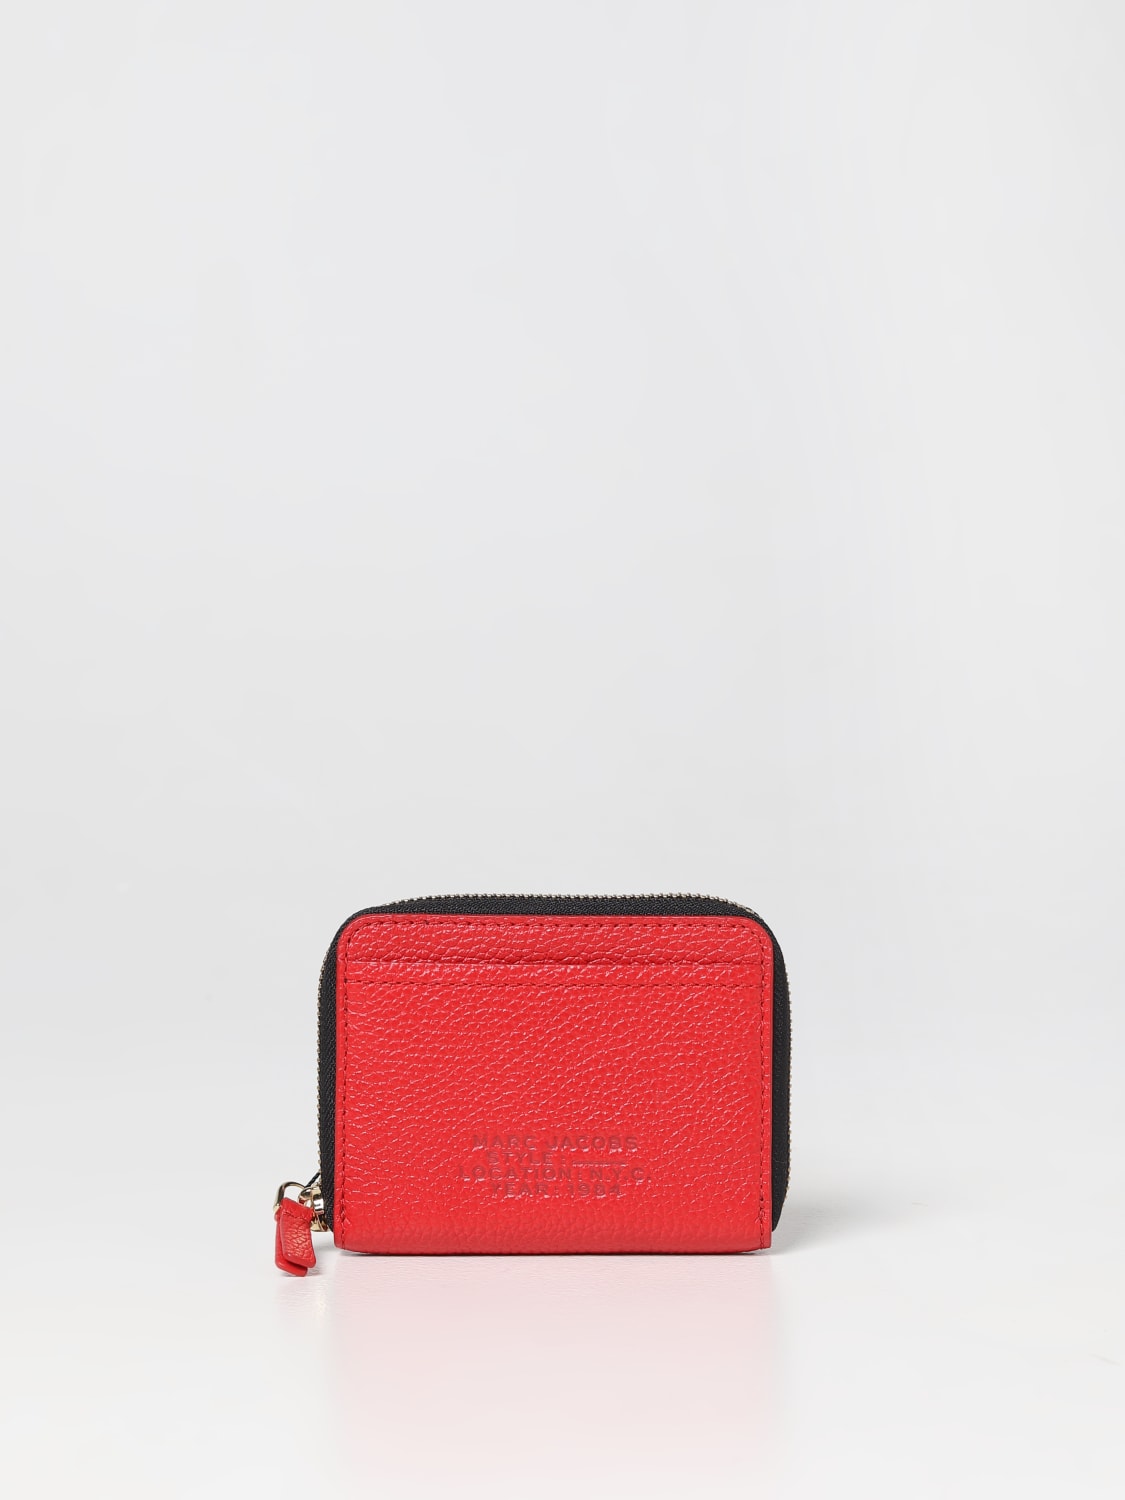 MARC JACOBS: wallet in grained leather - Red | MARC JACOBS wallet